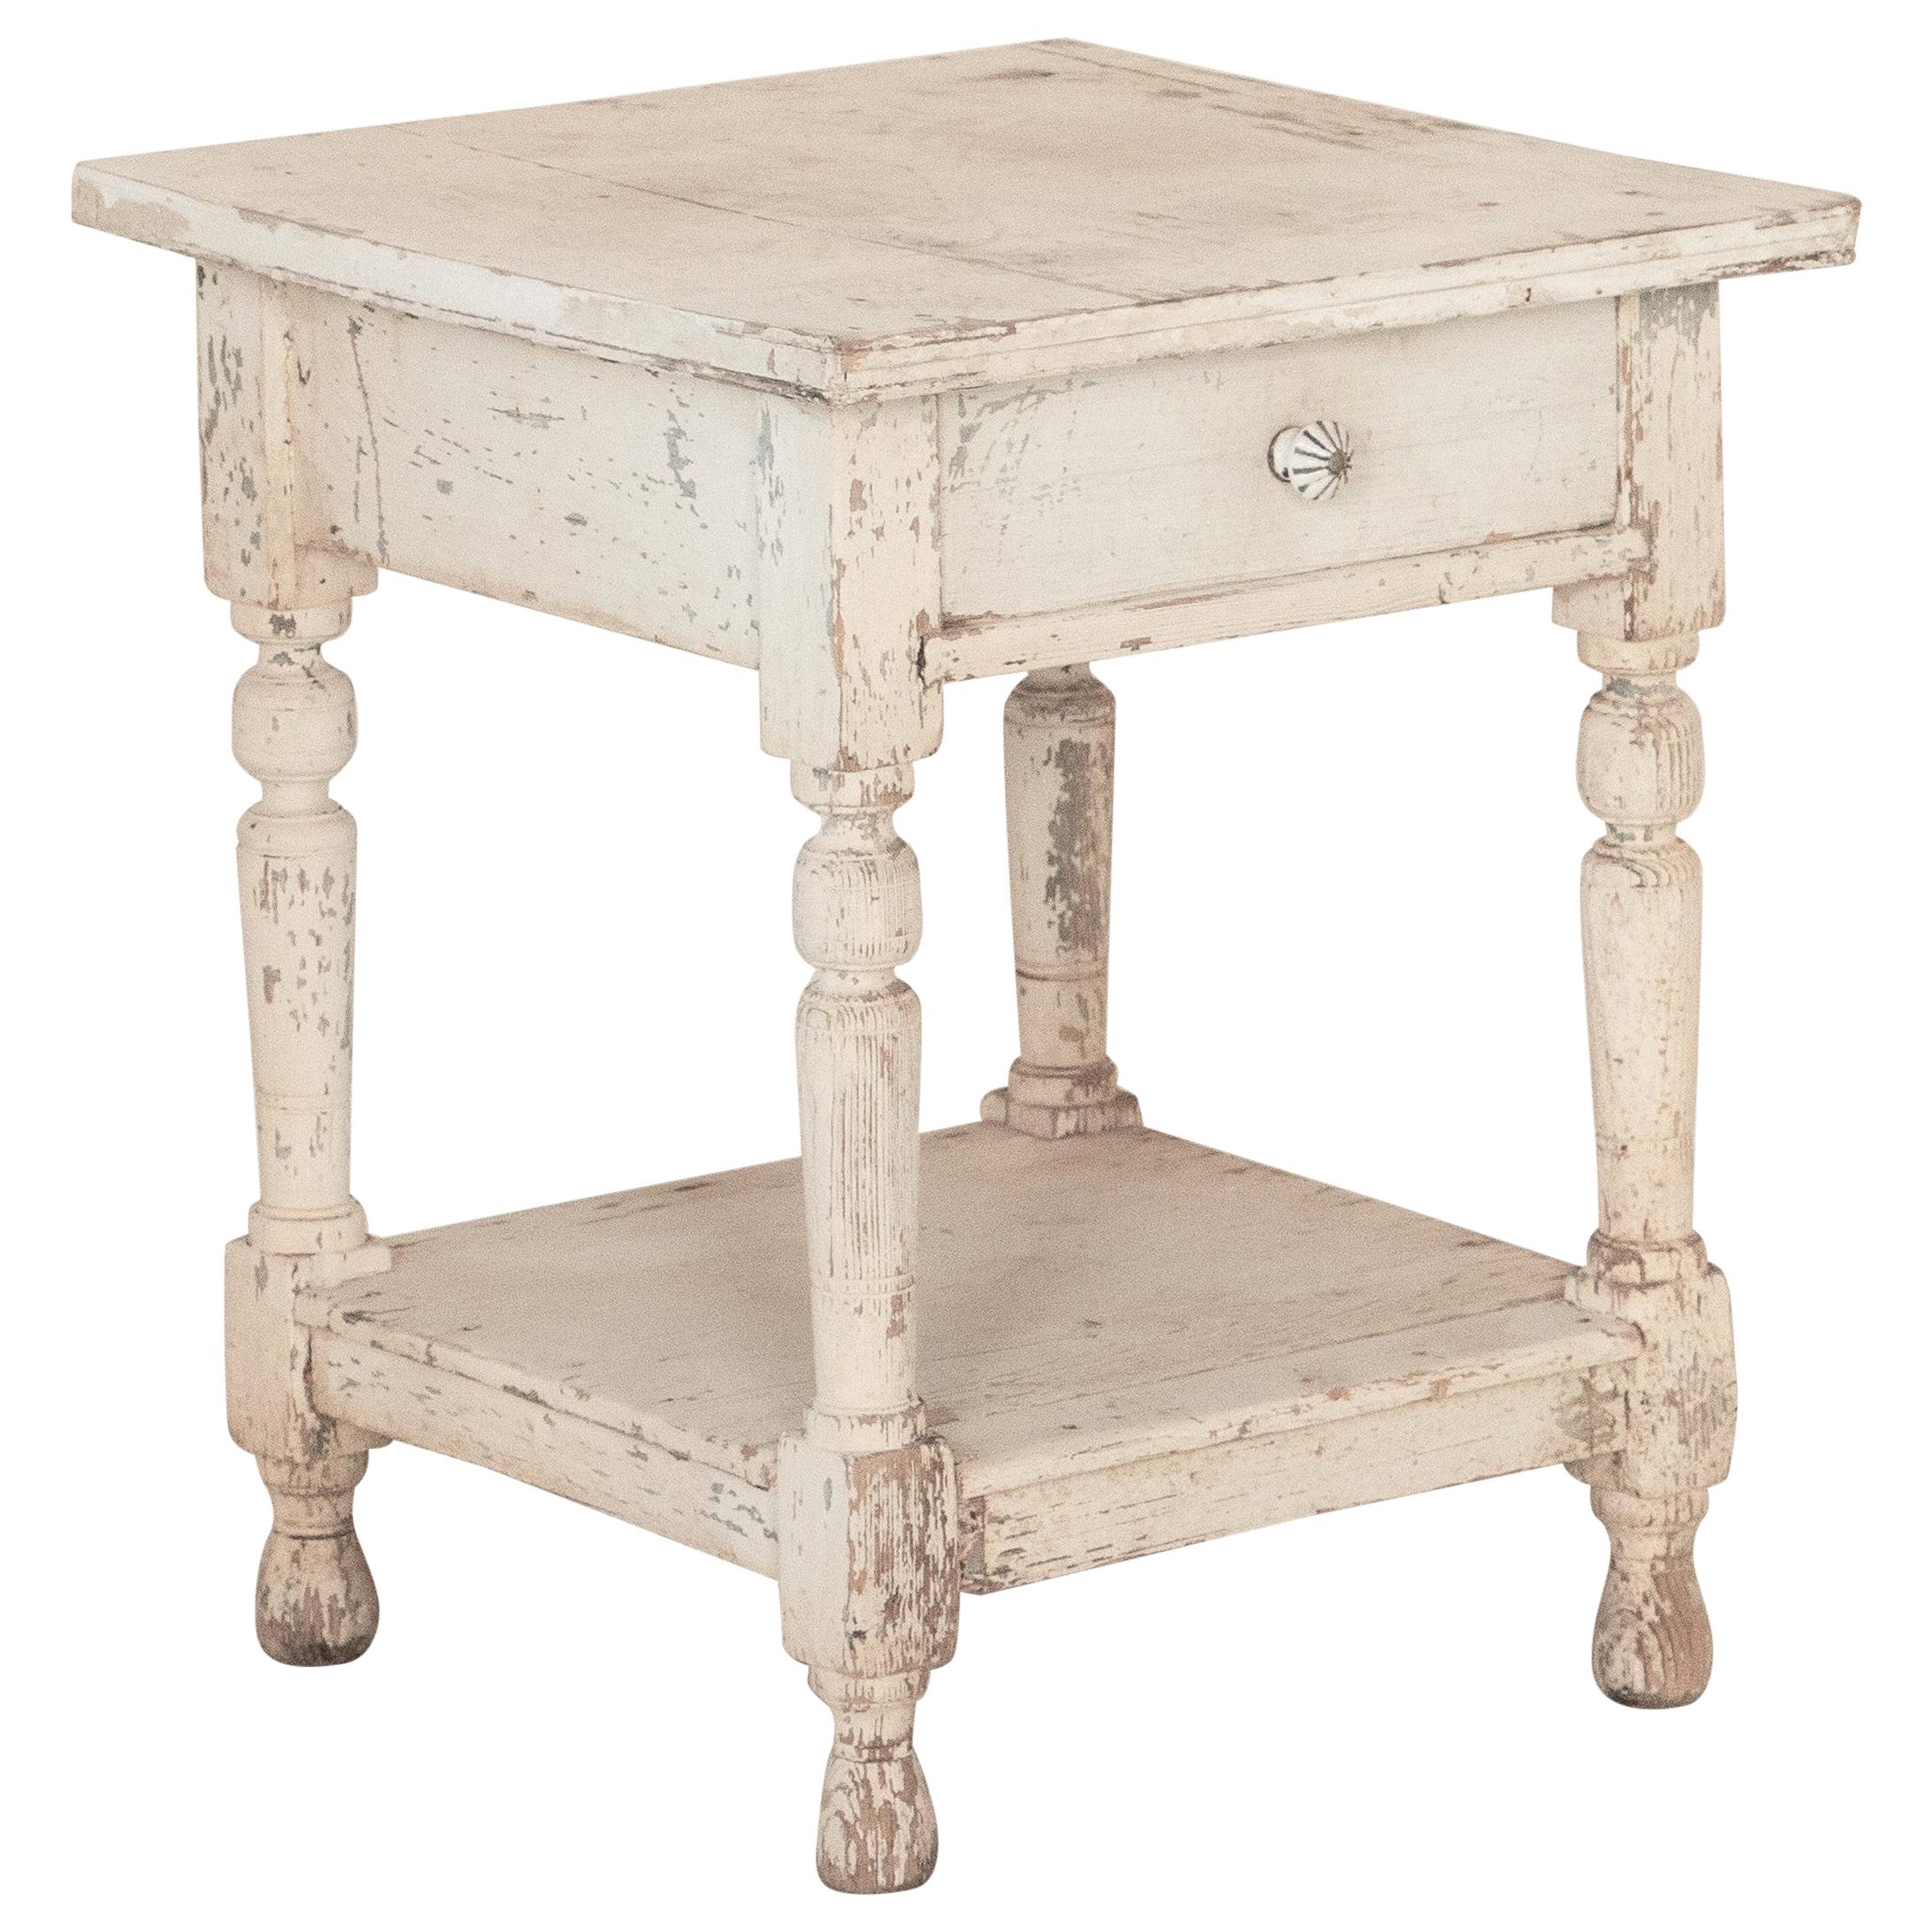 Antique Original White Painted Small Side Table